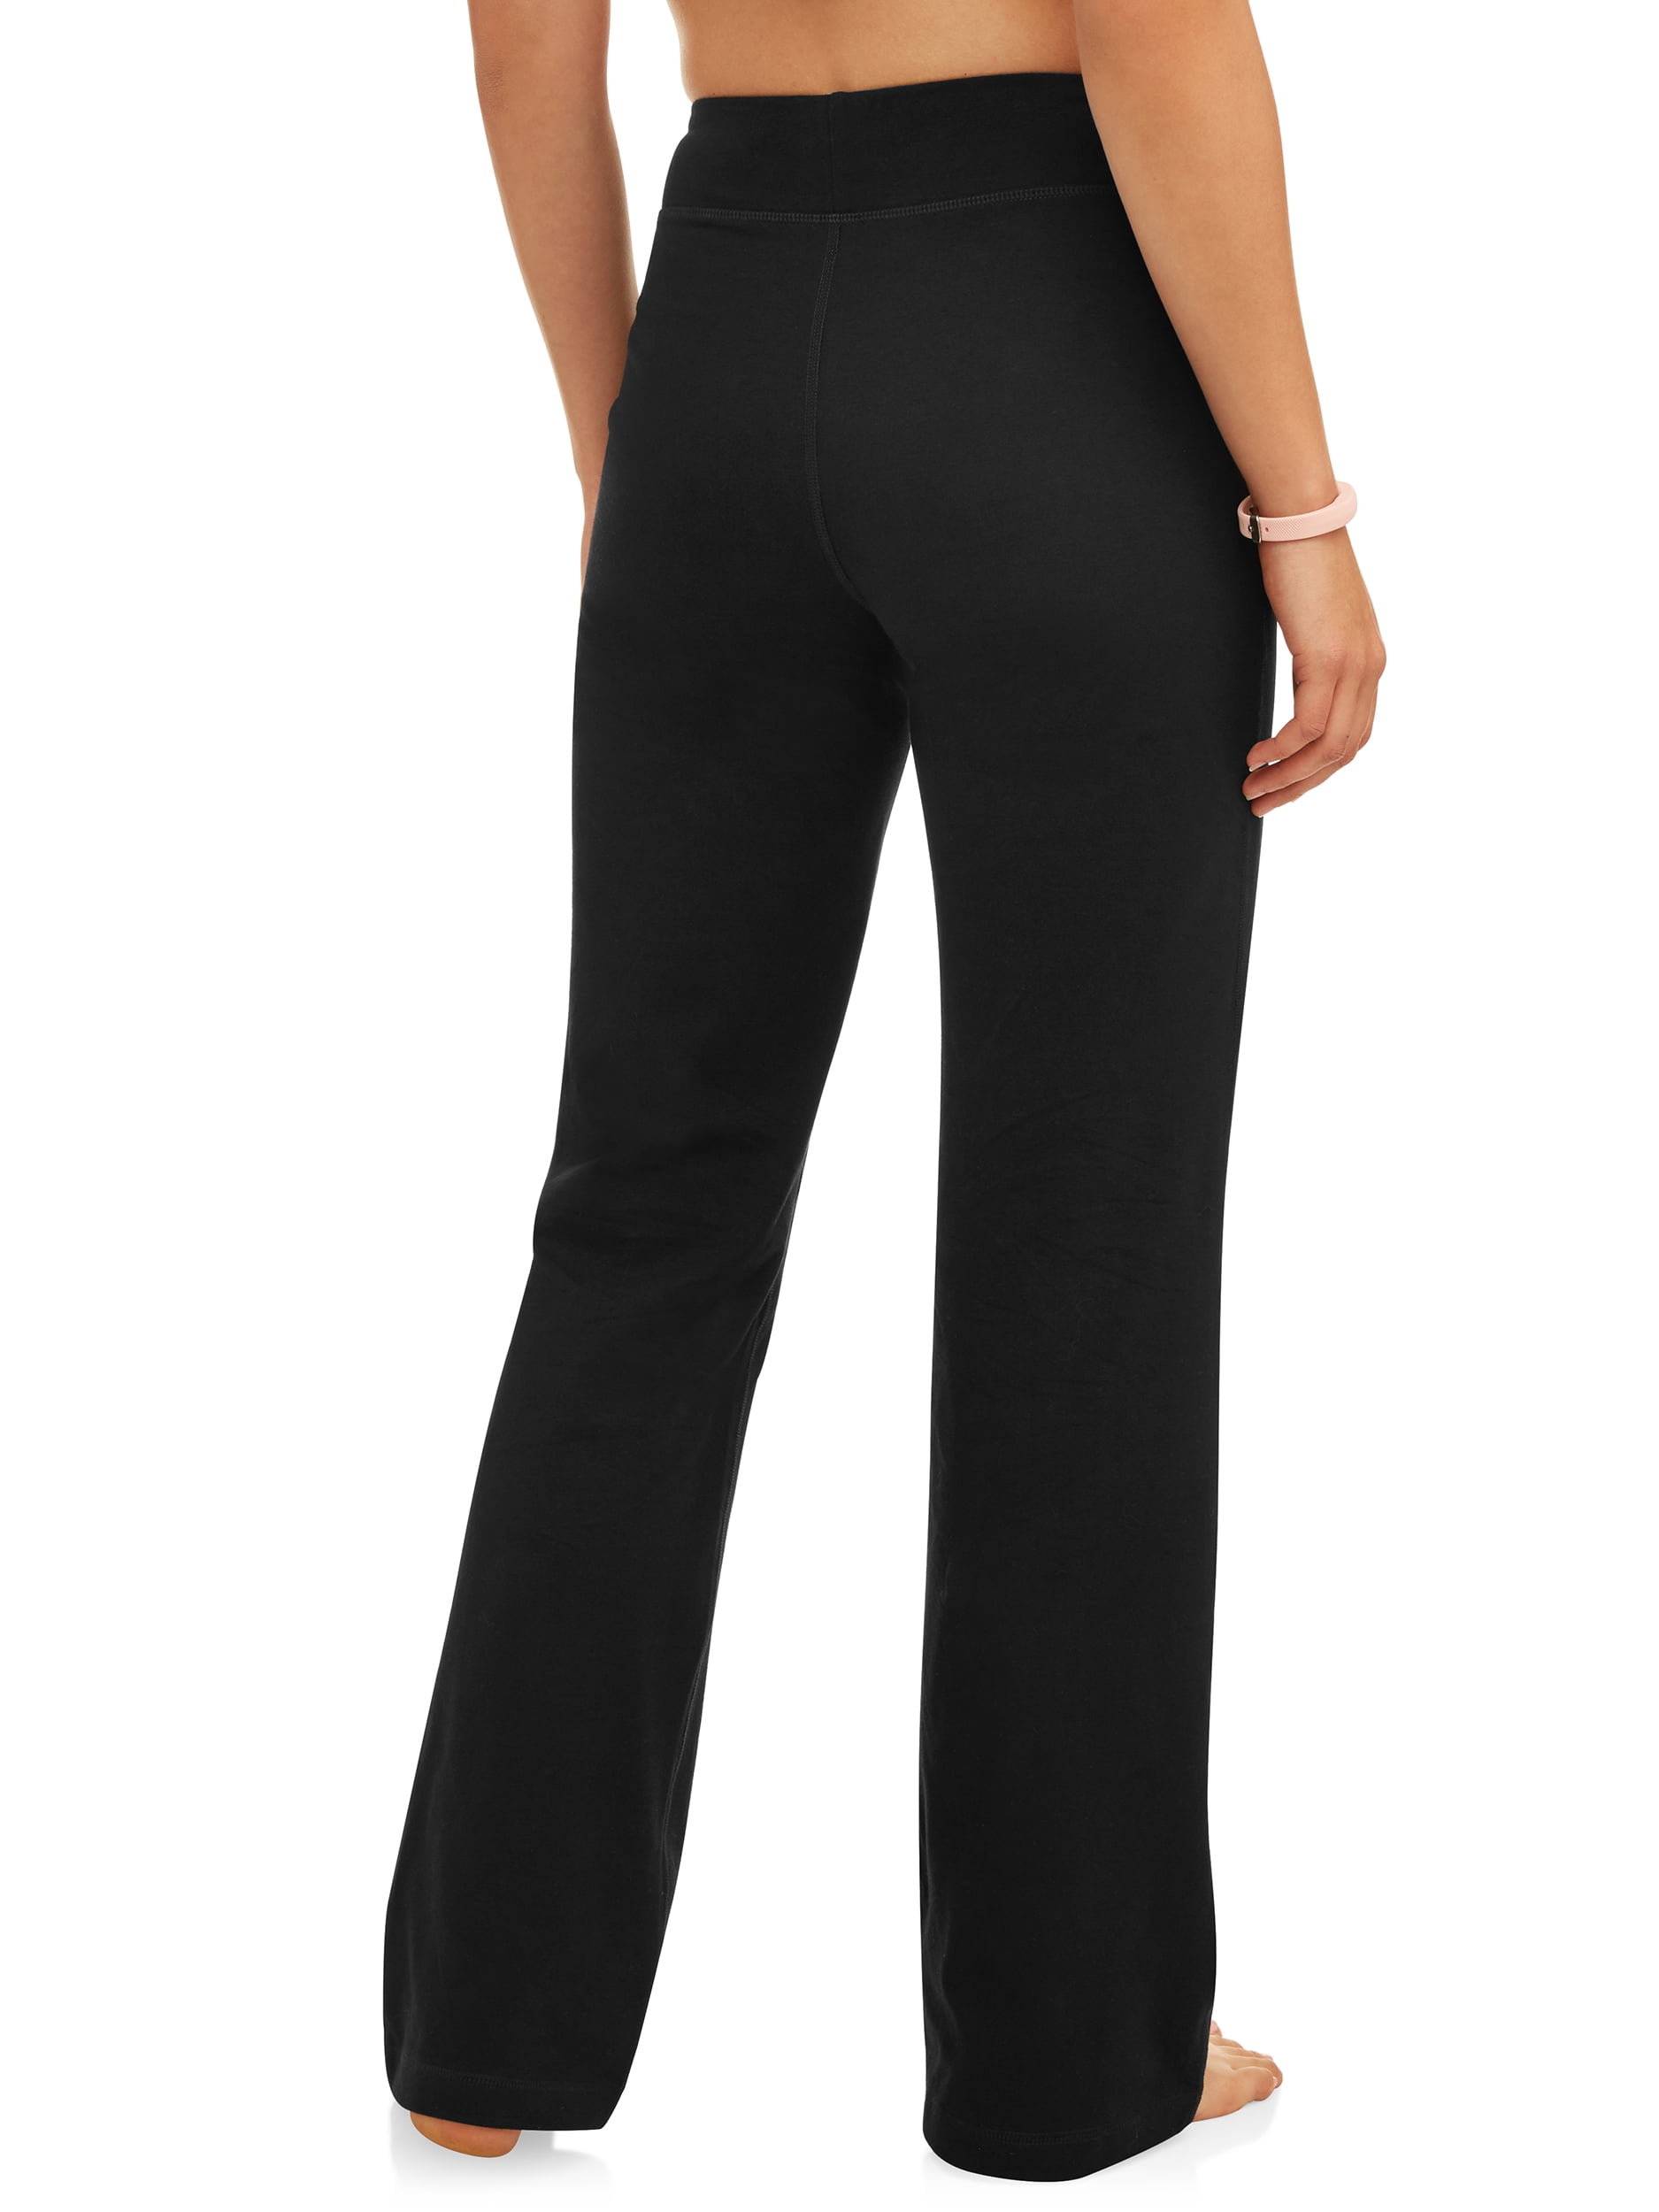 Athletic Works  Pants  Jumpsuits  Womens Dri More Core Athleisure  Bootcut Yoga Pants Available Regular And Petite  Poshmark